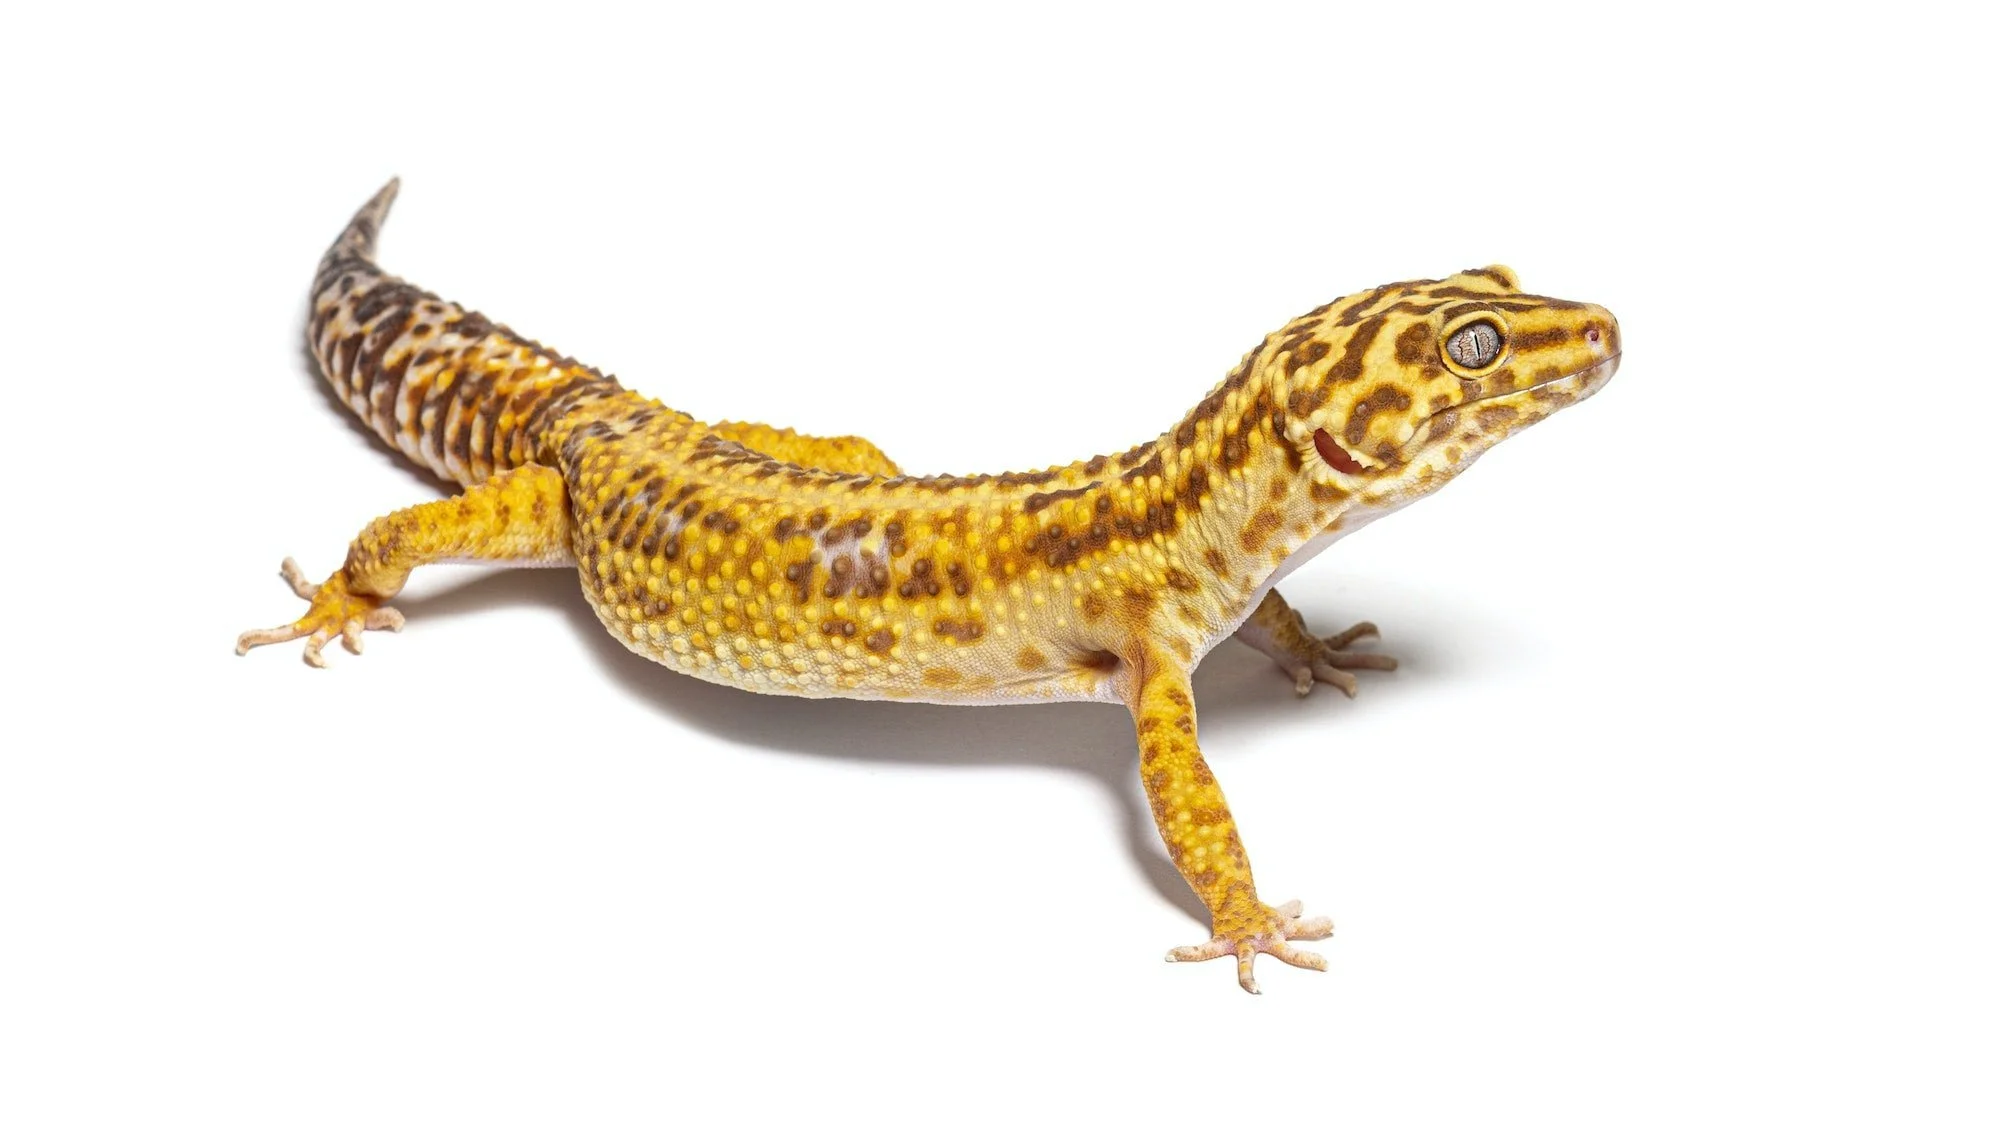 Side view of Leopard gecko, Eublepharis macularius, isolated on